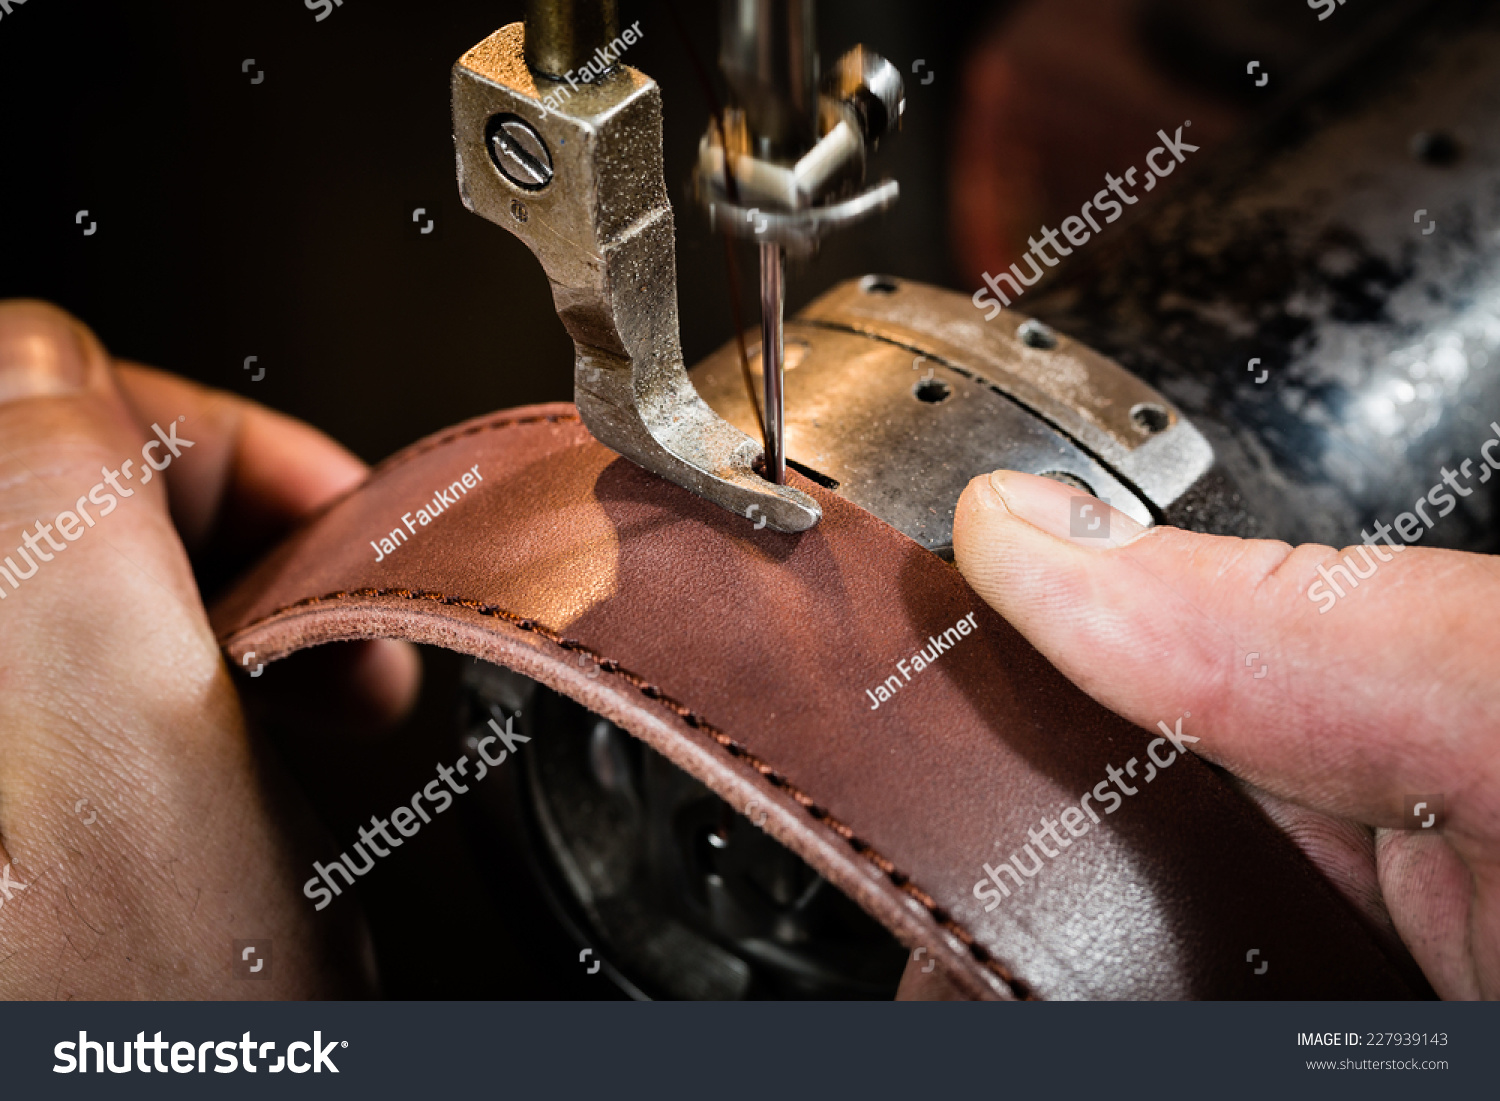 Sewing process of the leather belt. Man's hands behind sewing. Leather workshop. #227939143